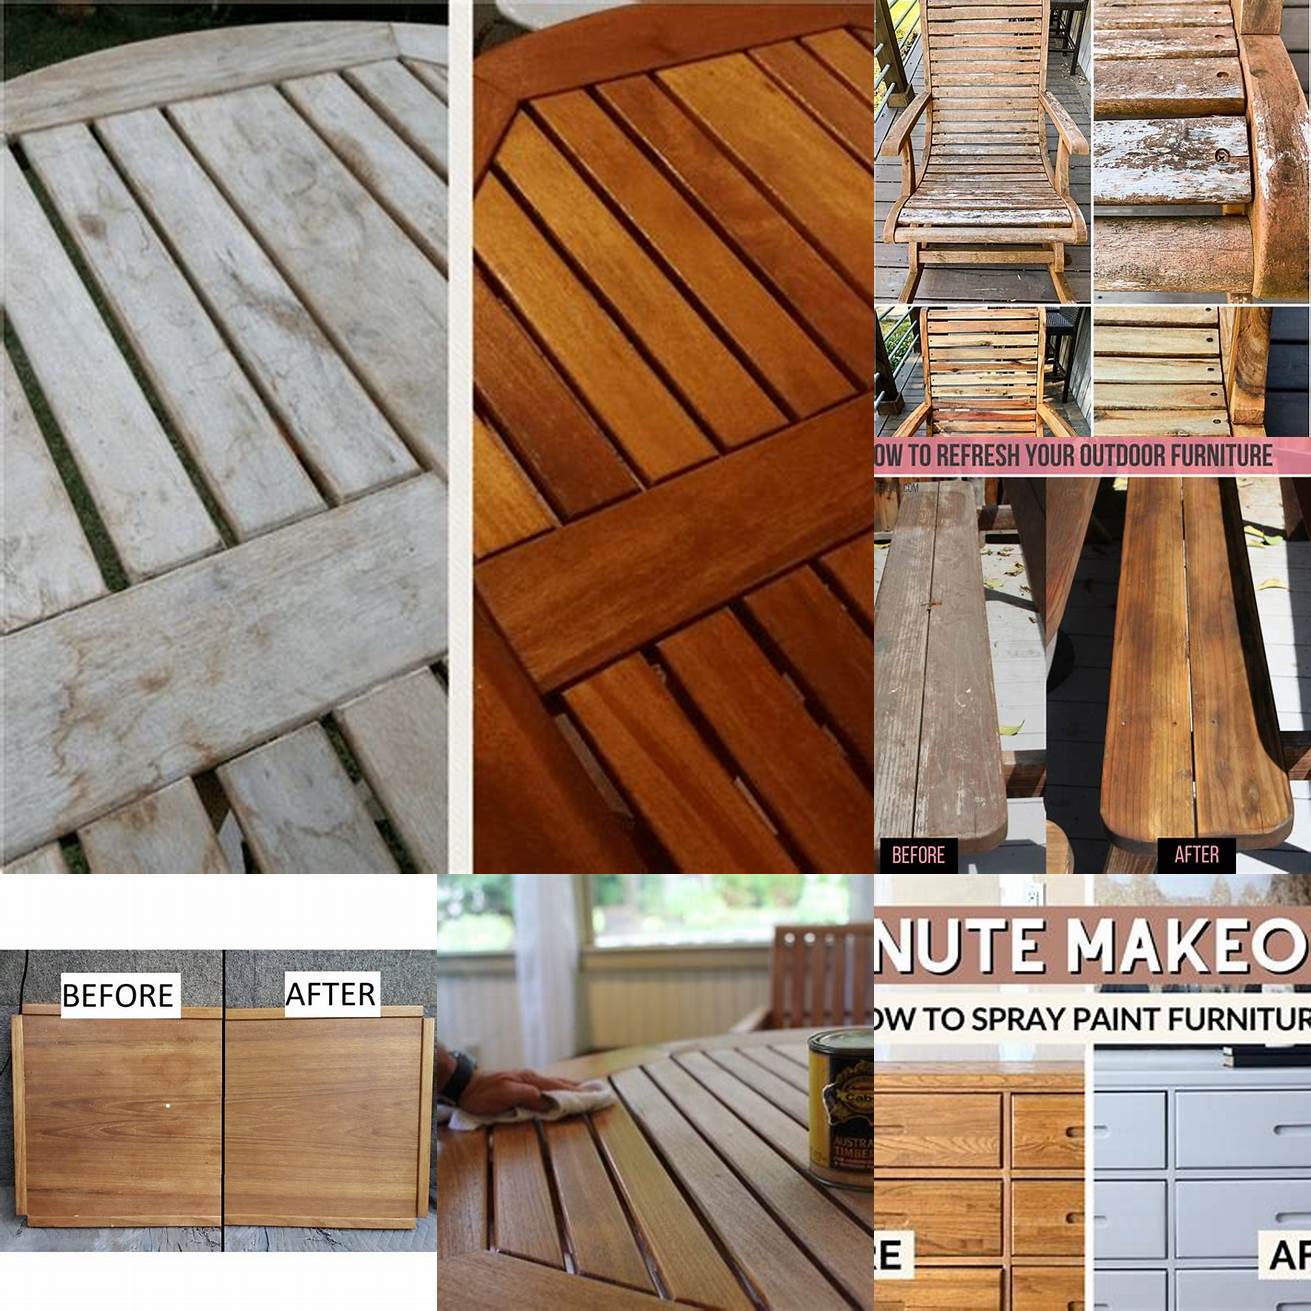 Teak Furniture Before and After Oil Spray